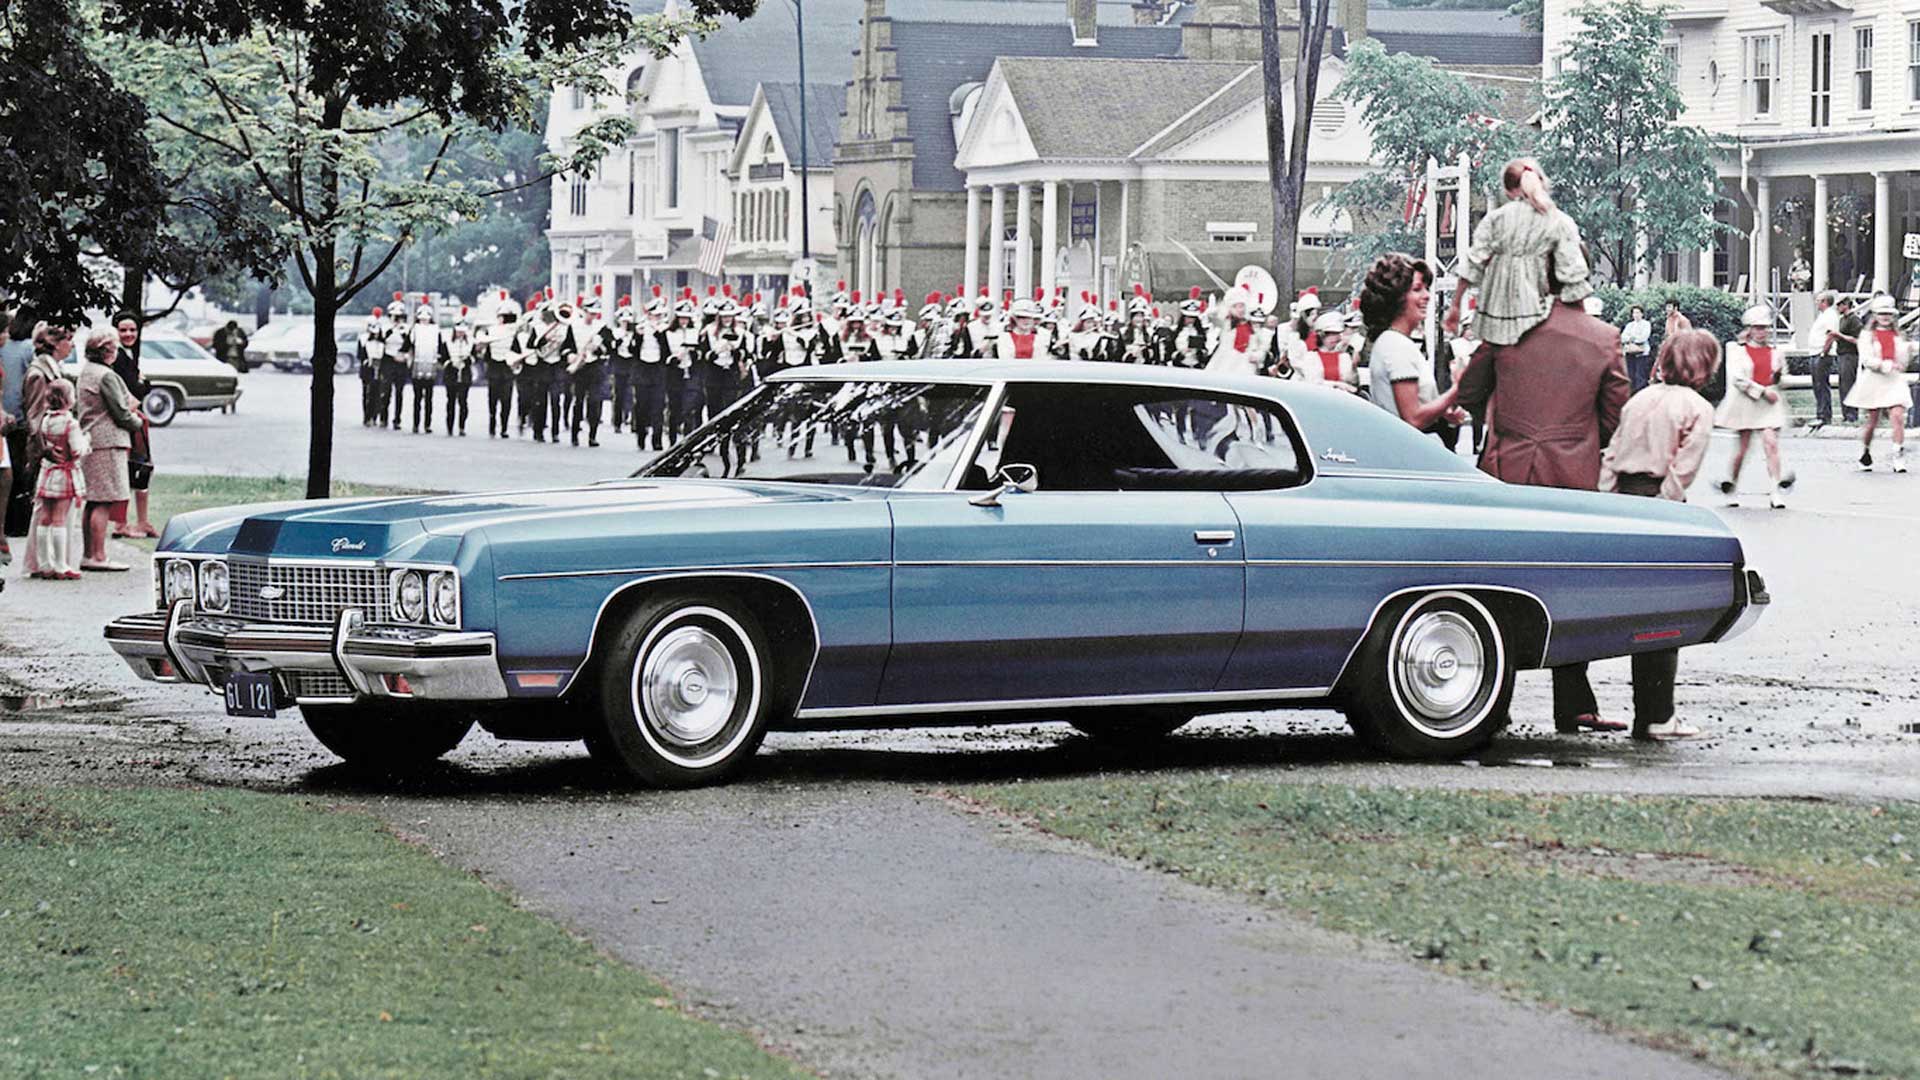 <p>Chevrolet’s marketing pitch for 1973 sounded more like a political campaign speech, rather than a way to sell cars. It was about ‘building a better way to see America’. And what could be better than seeing it from the vinyl and wood grain interior of your Impala?</p> <p>Powering you across the country was a standard 145hp ‘Turbo Fire’ 5.7-liter (350-cubic inch) V8. But, if you really want to make progress, you could pick the optional 7.5 (455-ci) ‘Turbo Jet’ V8 with 245hp. That might have required several more stops for gas, though…</p>